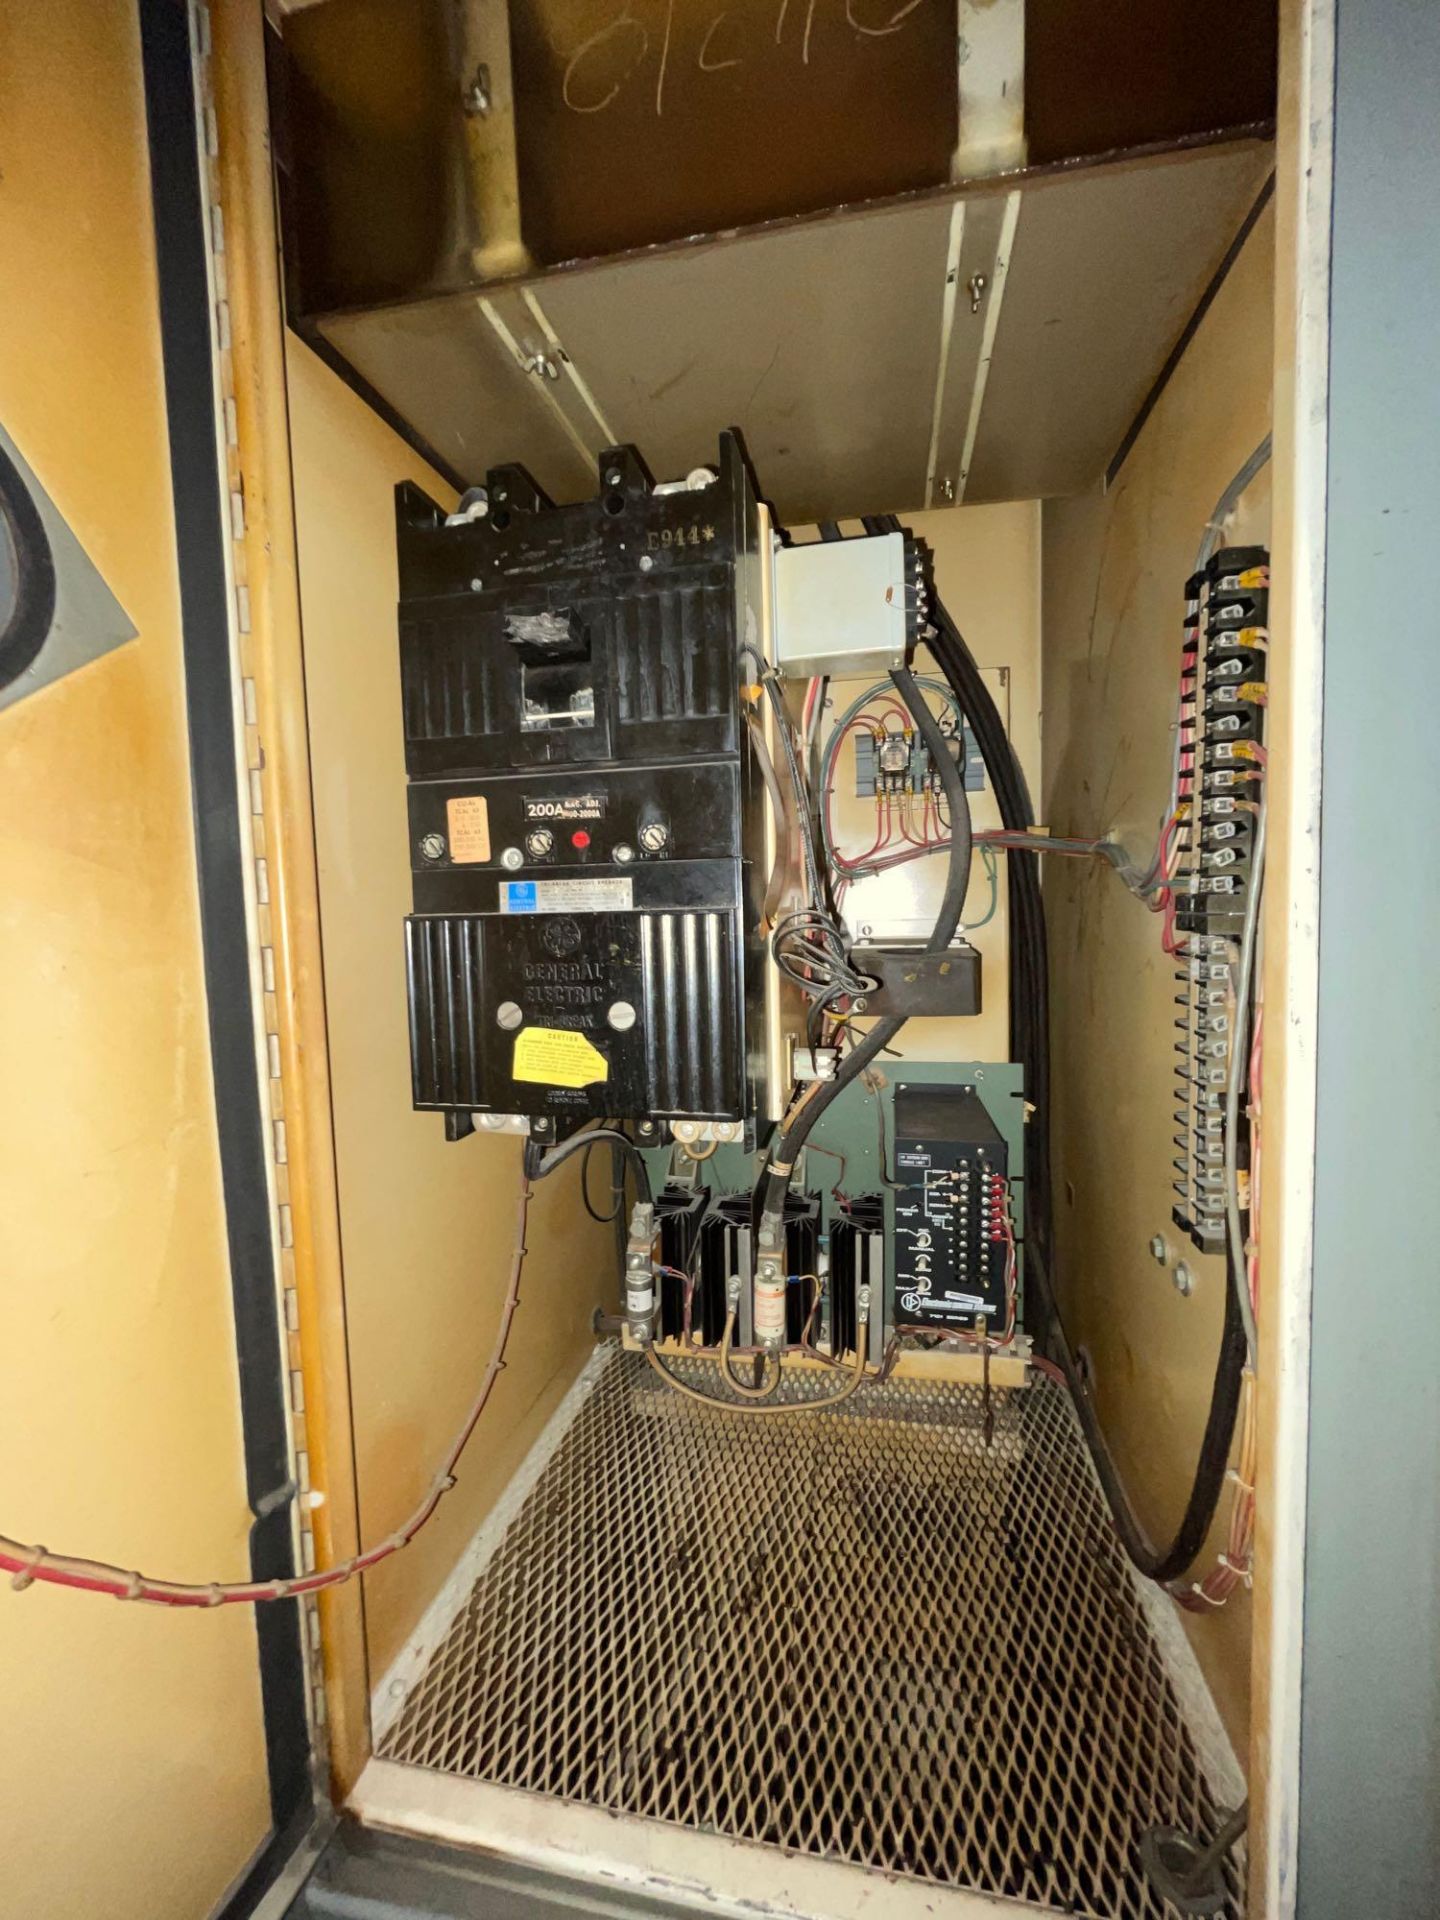 Glass Pane Bending Oven Furnace with Electrical Cabinets - Image 24 of 68